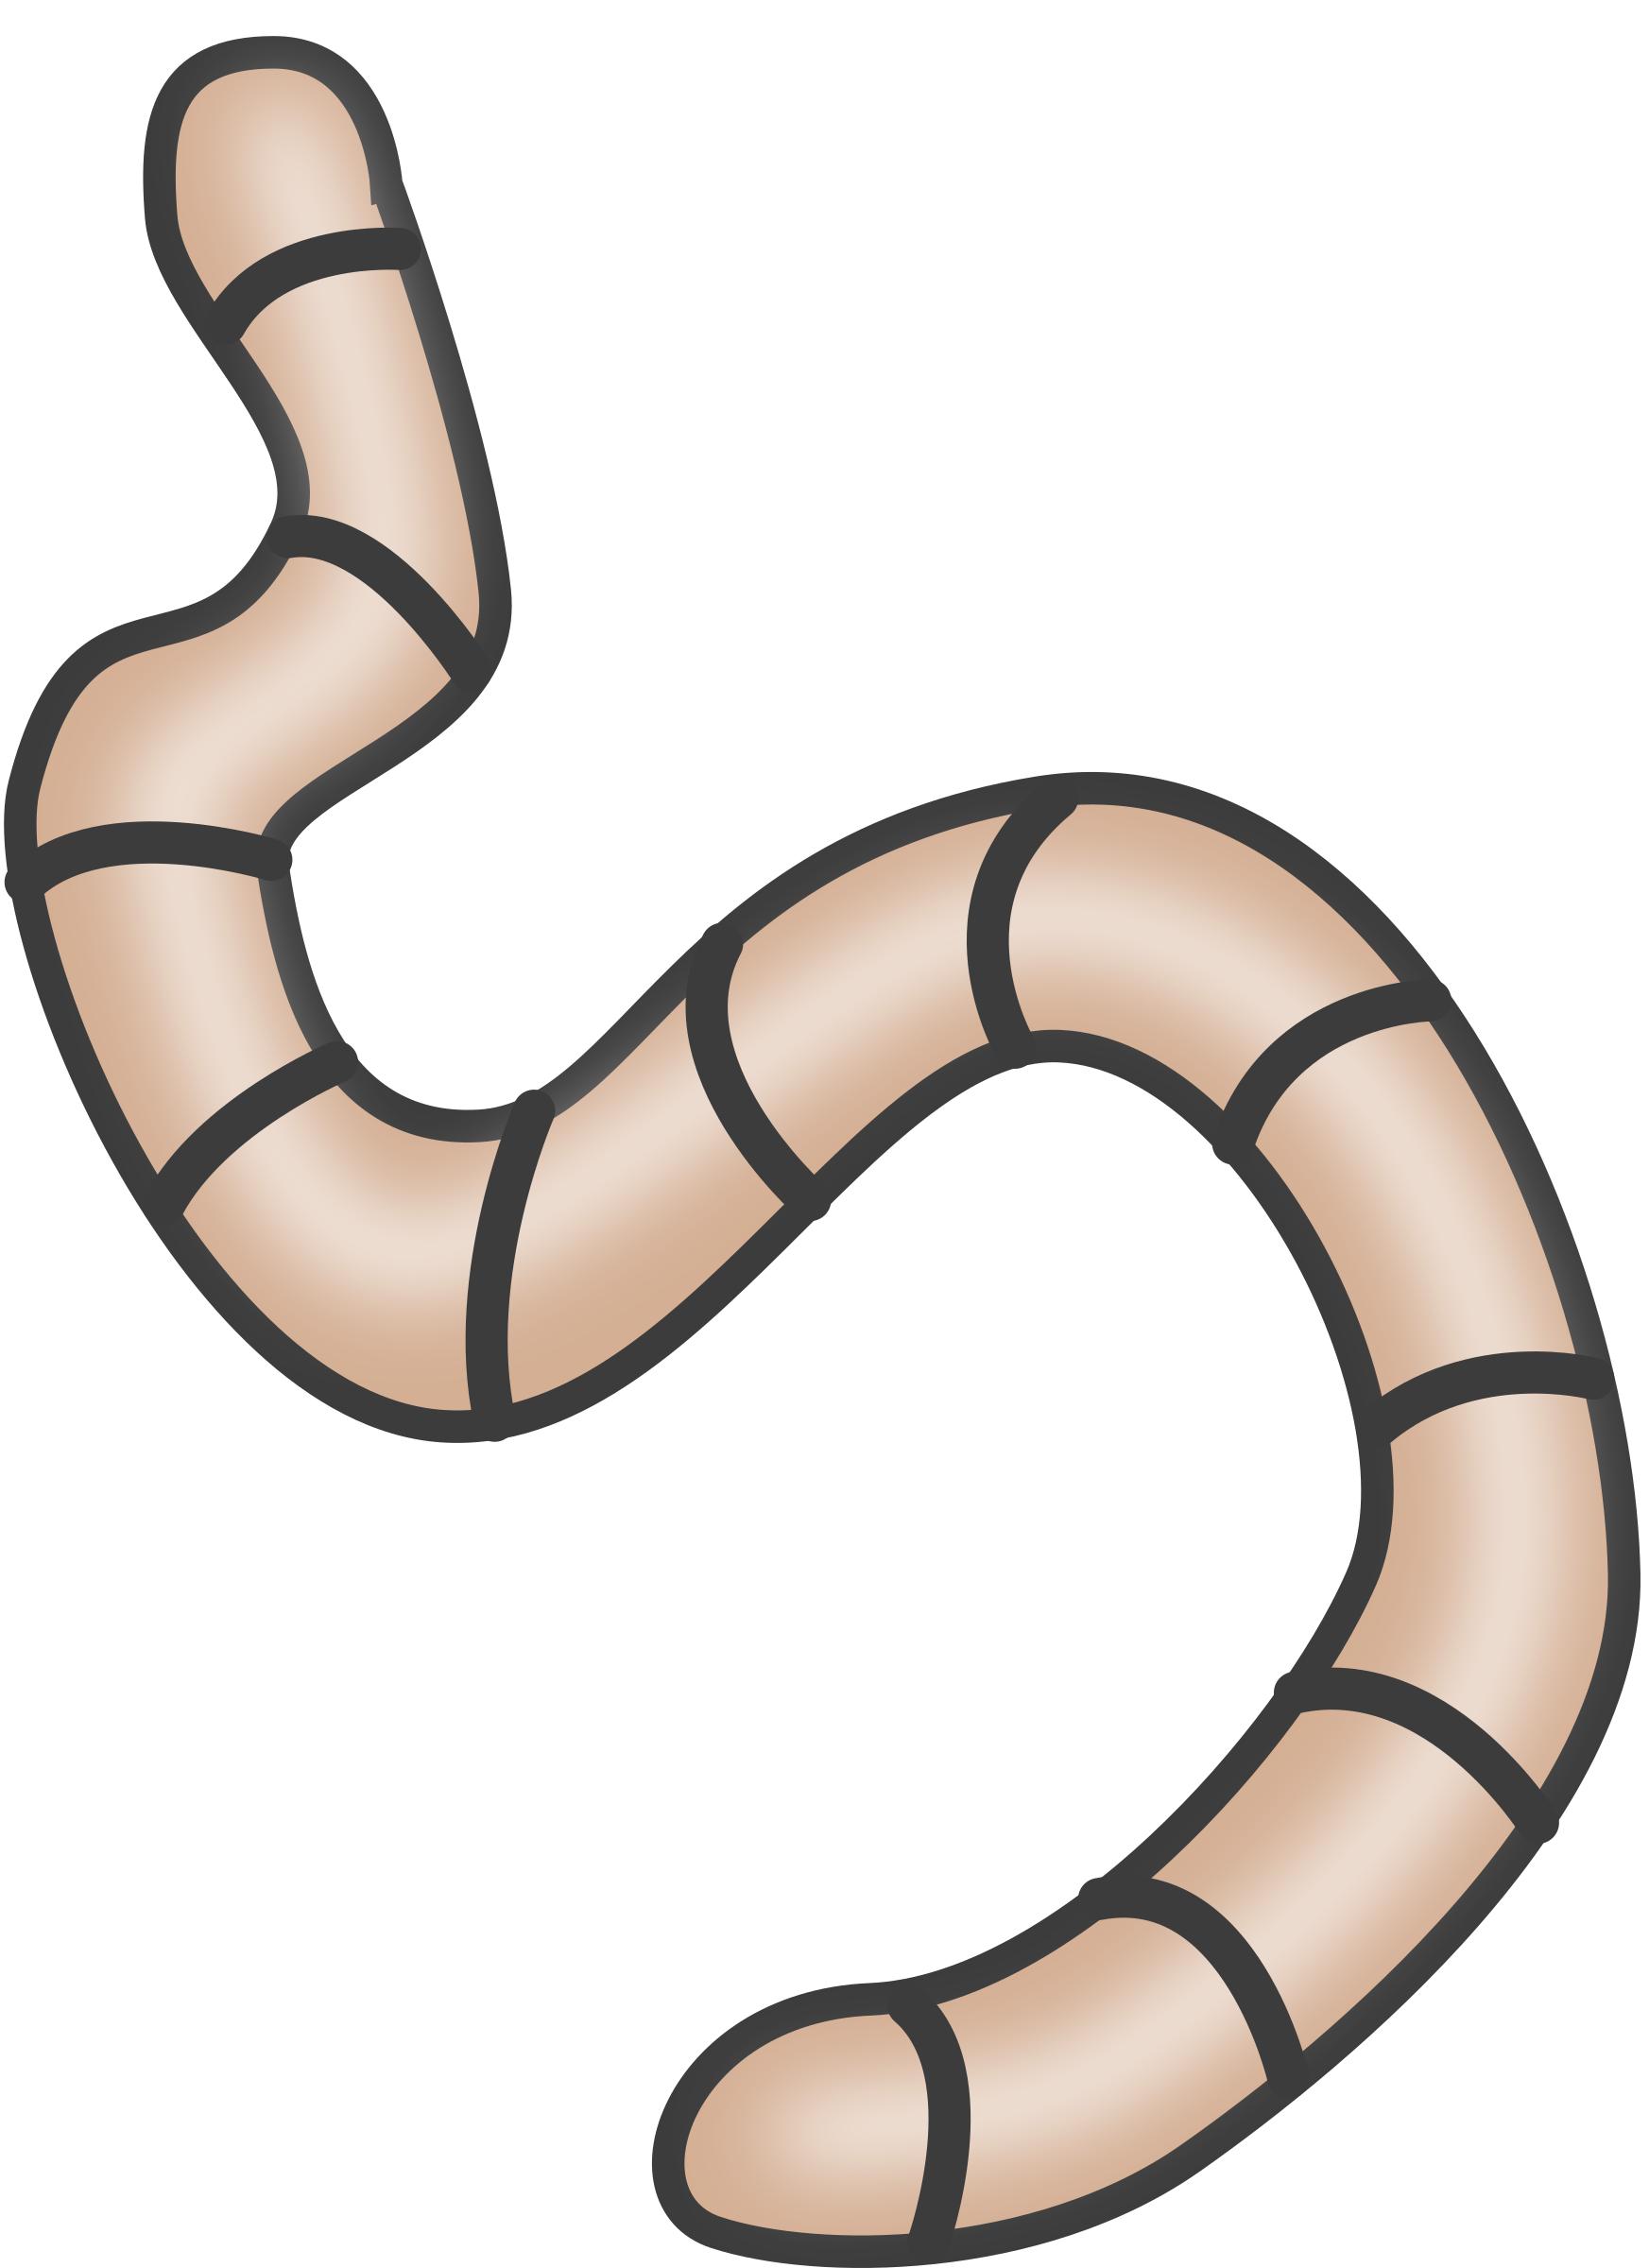 Earthworms png